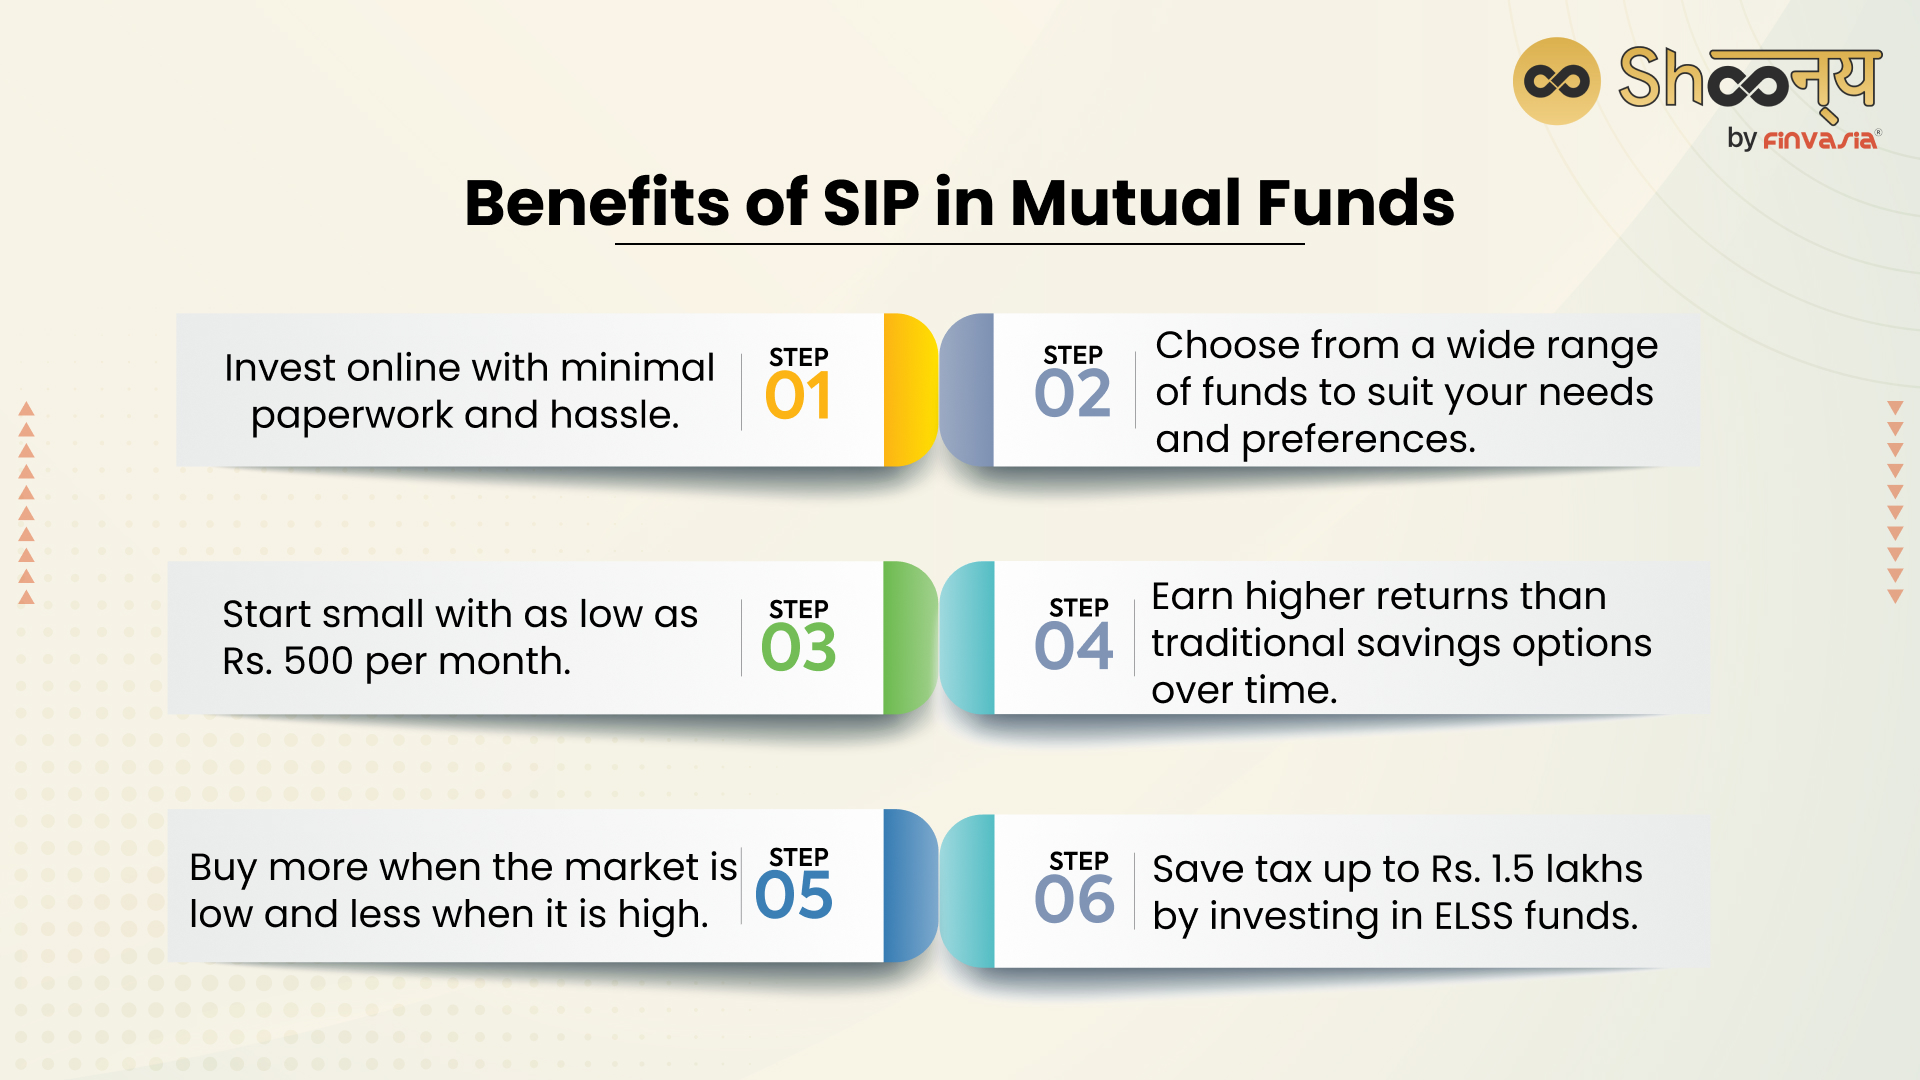 Benefits of SIP in Mutual Funds